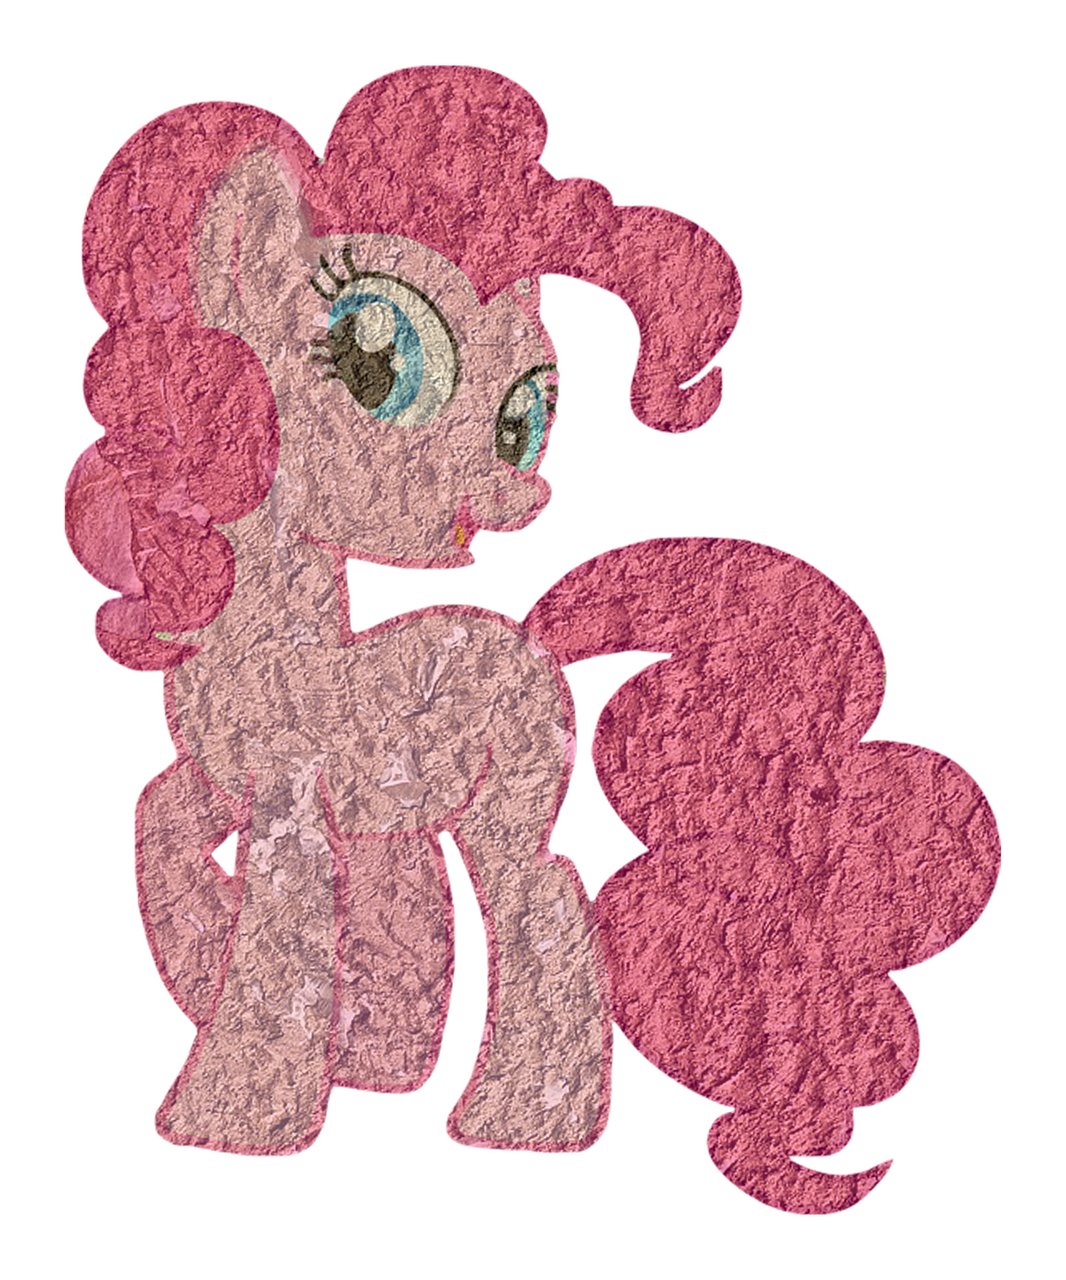 Download My Little Pony Free Download HQ PNG Image